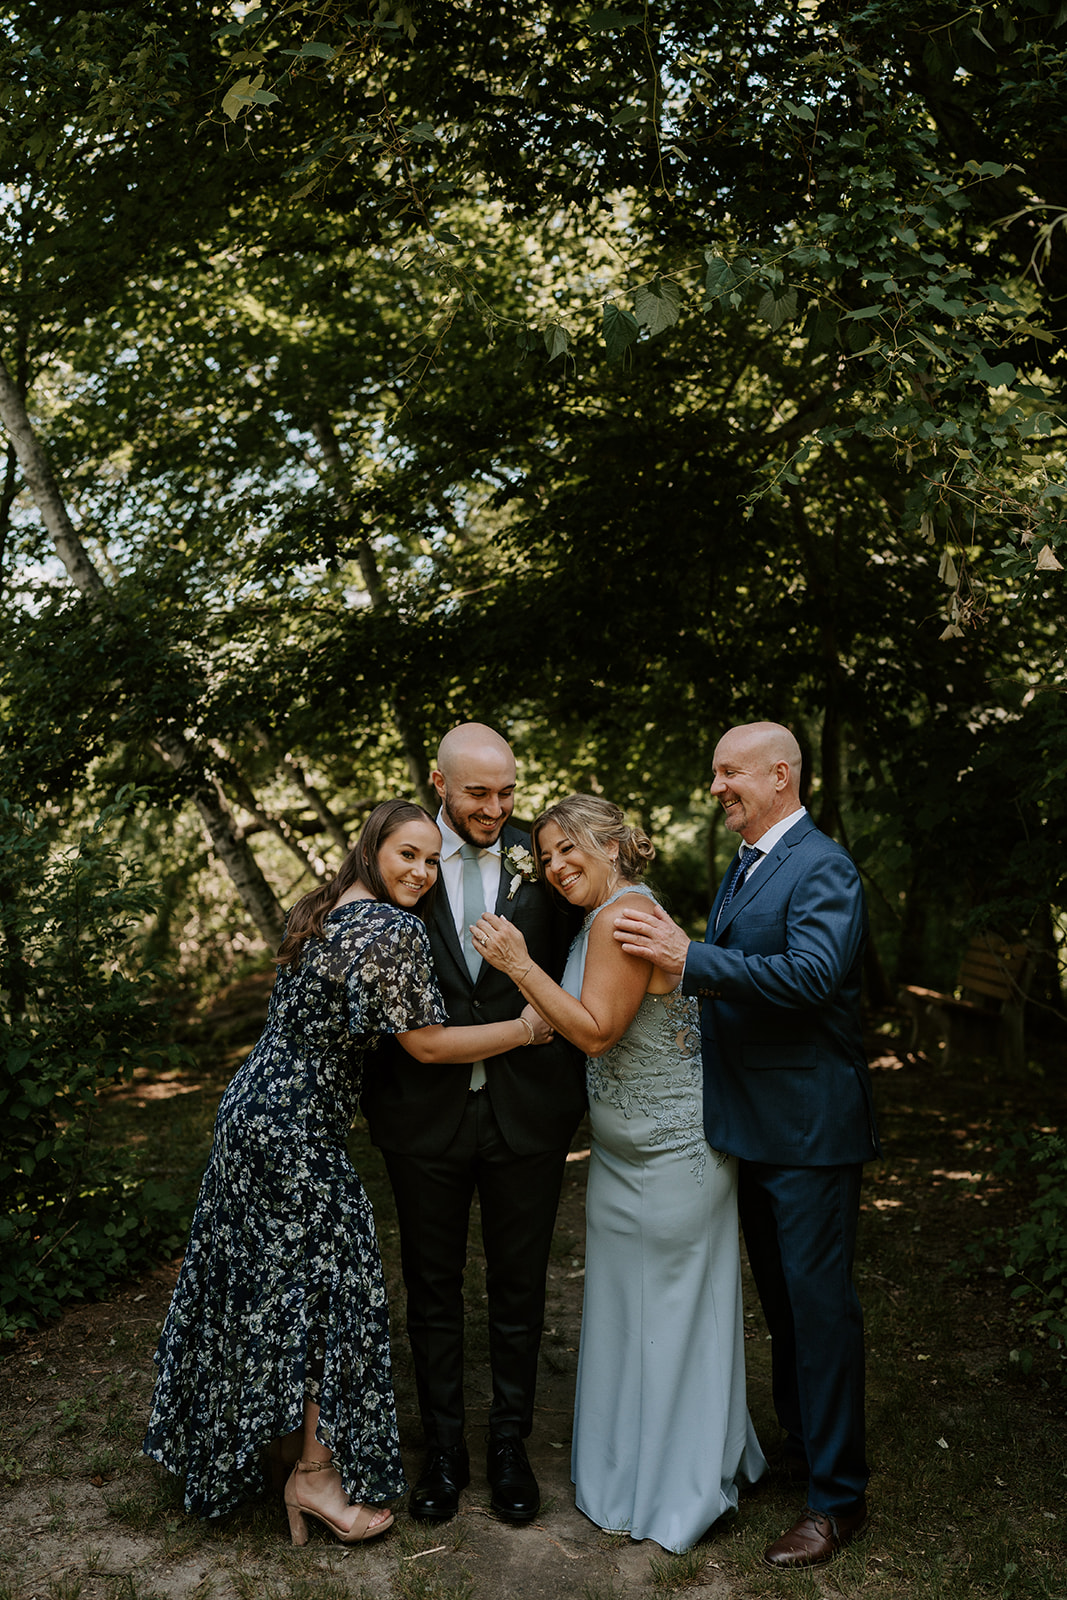 Groom being hugged by family